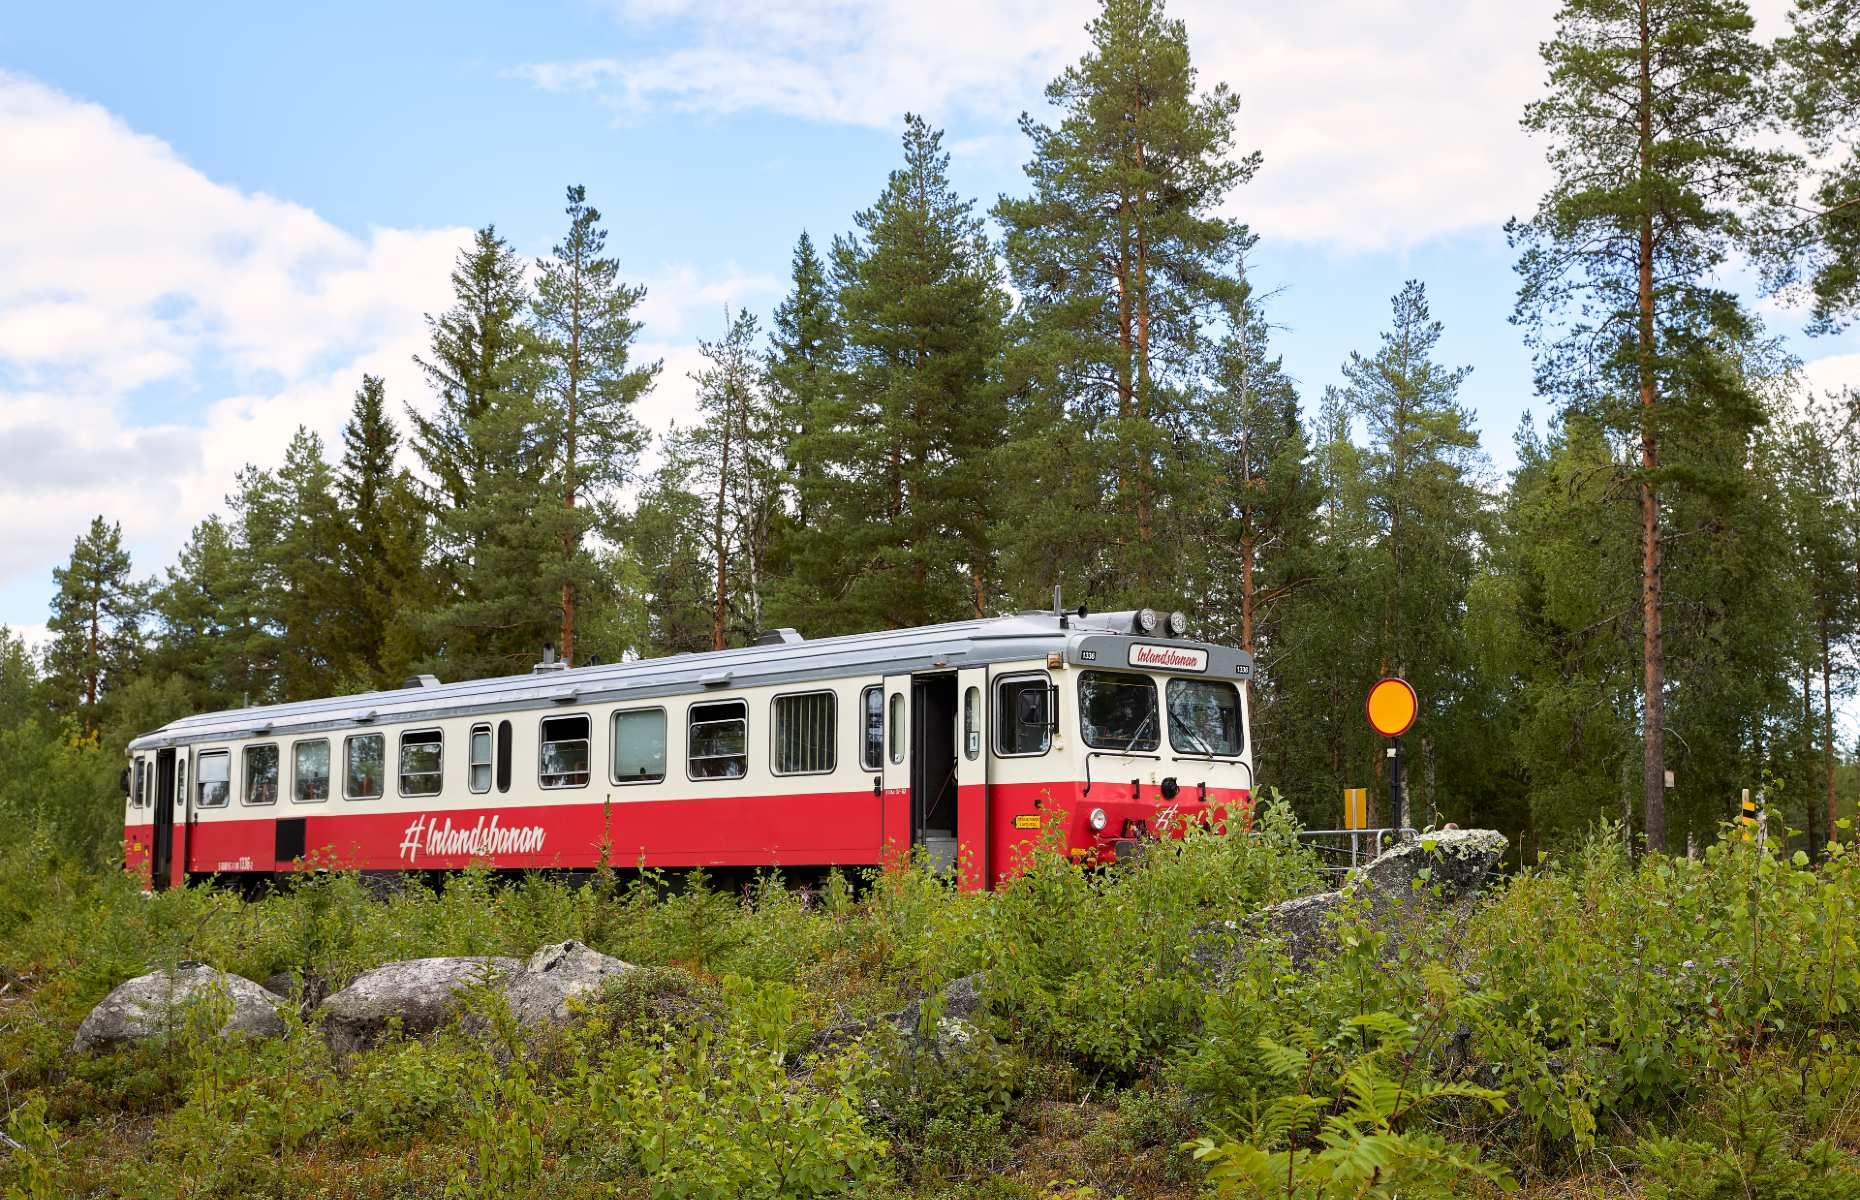 <p>Slicing through Sweden from top to bottom, the <a href="https://res.inlandsbanan.se/en">Inlandsbanan</a> should be top of all rail buffs’ wish lists. This epic 807-mile (1,200km) track stretches between Kristinehamn in the south and Gällivare in the north, passing from relatively flat green fields through alpine forests and the perennially snowy mountains of Lapland. Naturally, such a monumental journey takes a while to complete, with the typical itinerary taking nine days to cover the full route.</p>